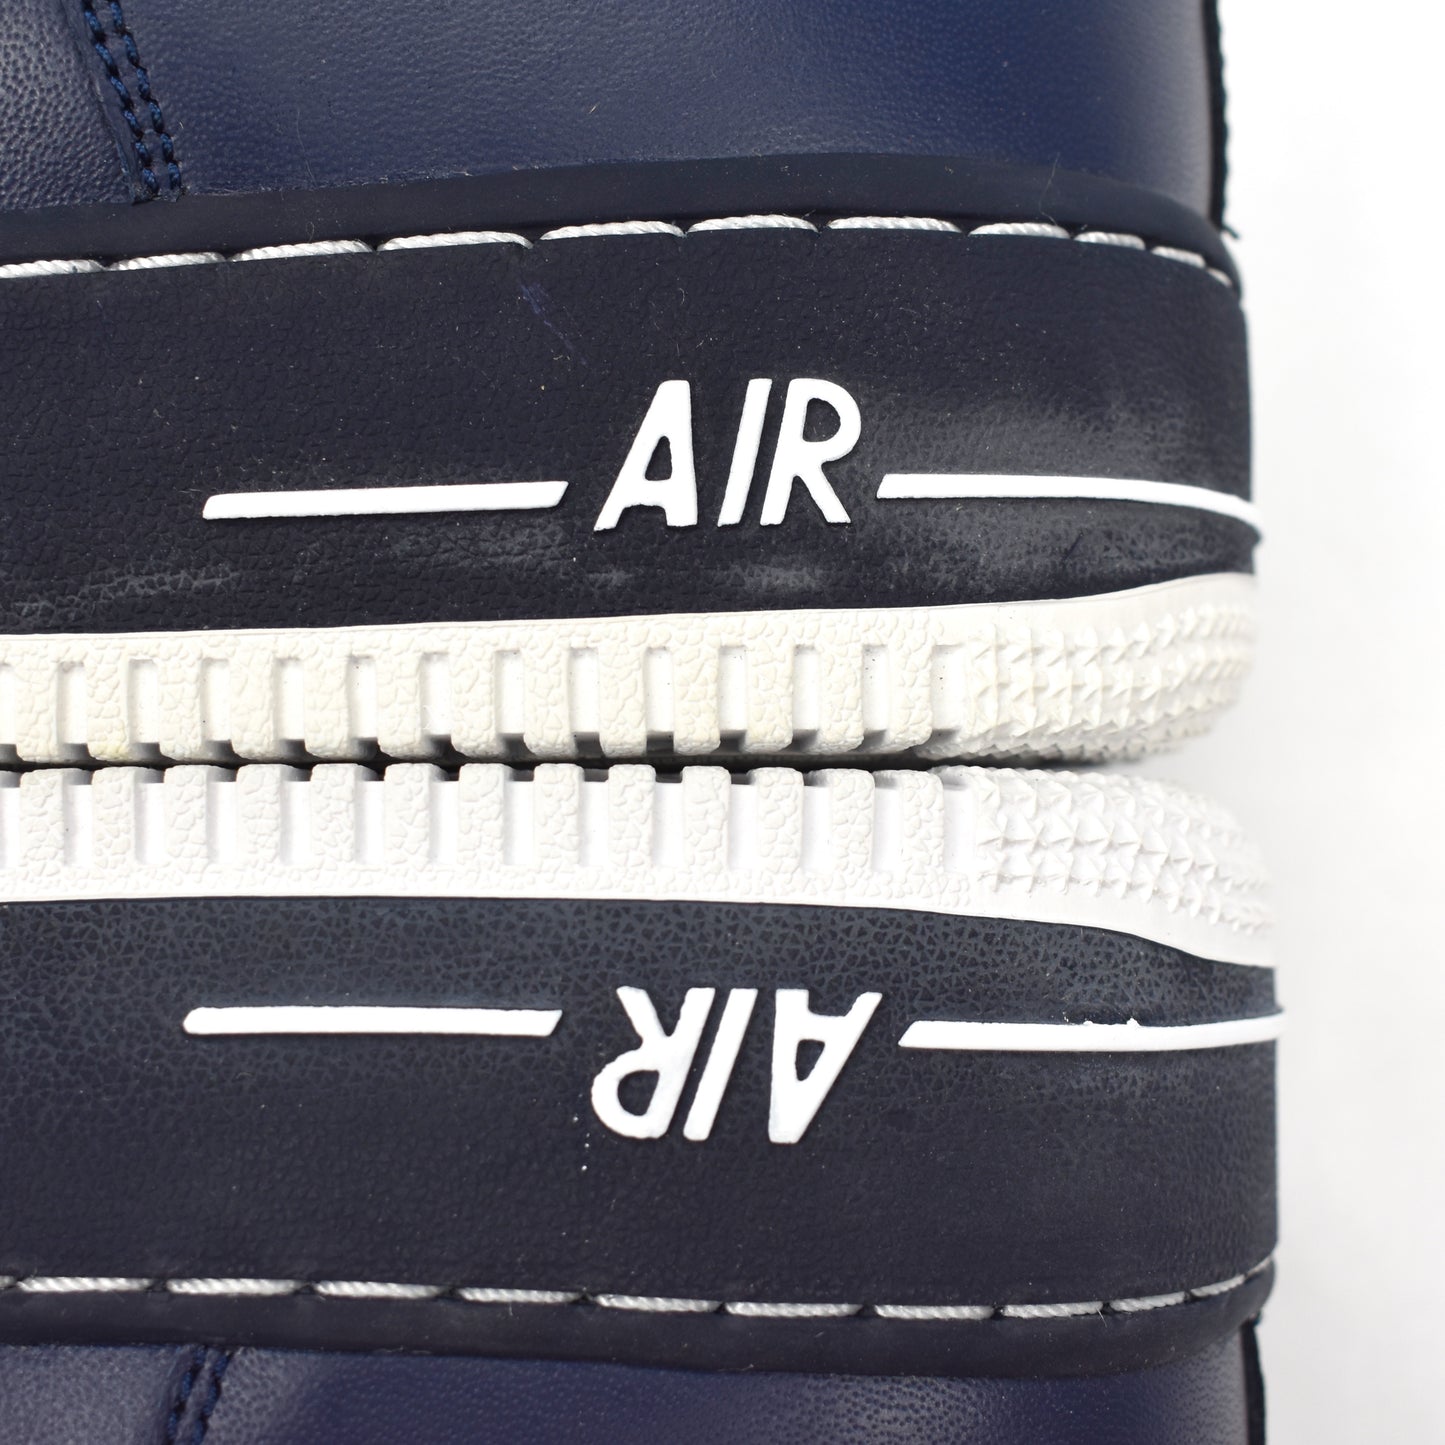 Nike - Air Force 1 '07 Low 'Blueprint' (Obsidian/White)